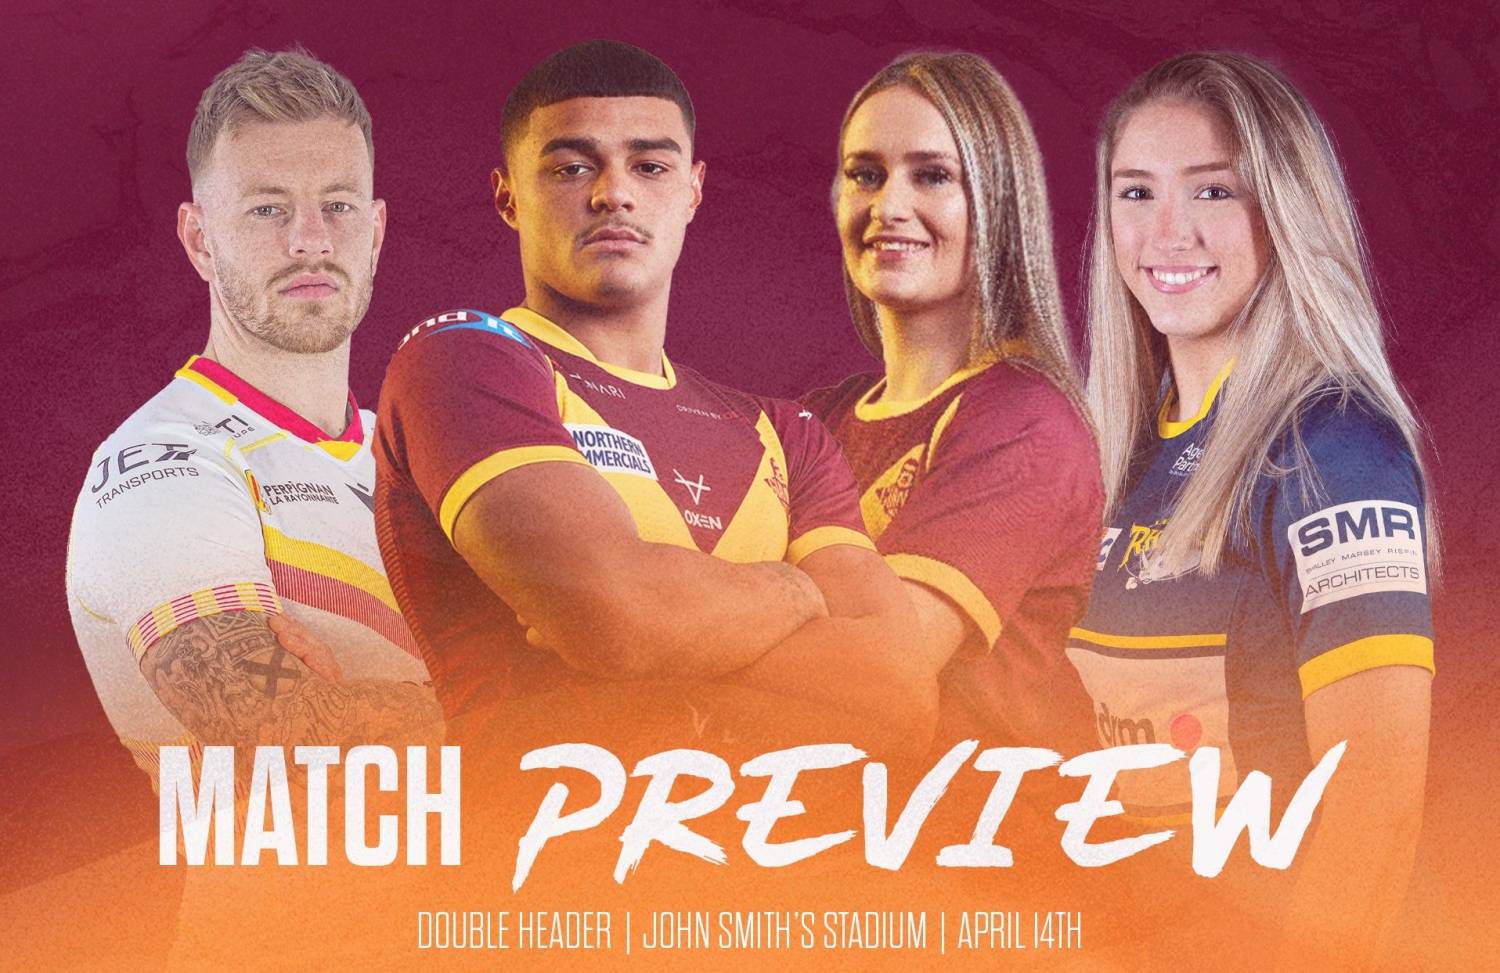 Match Preview Double Header